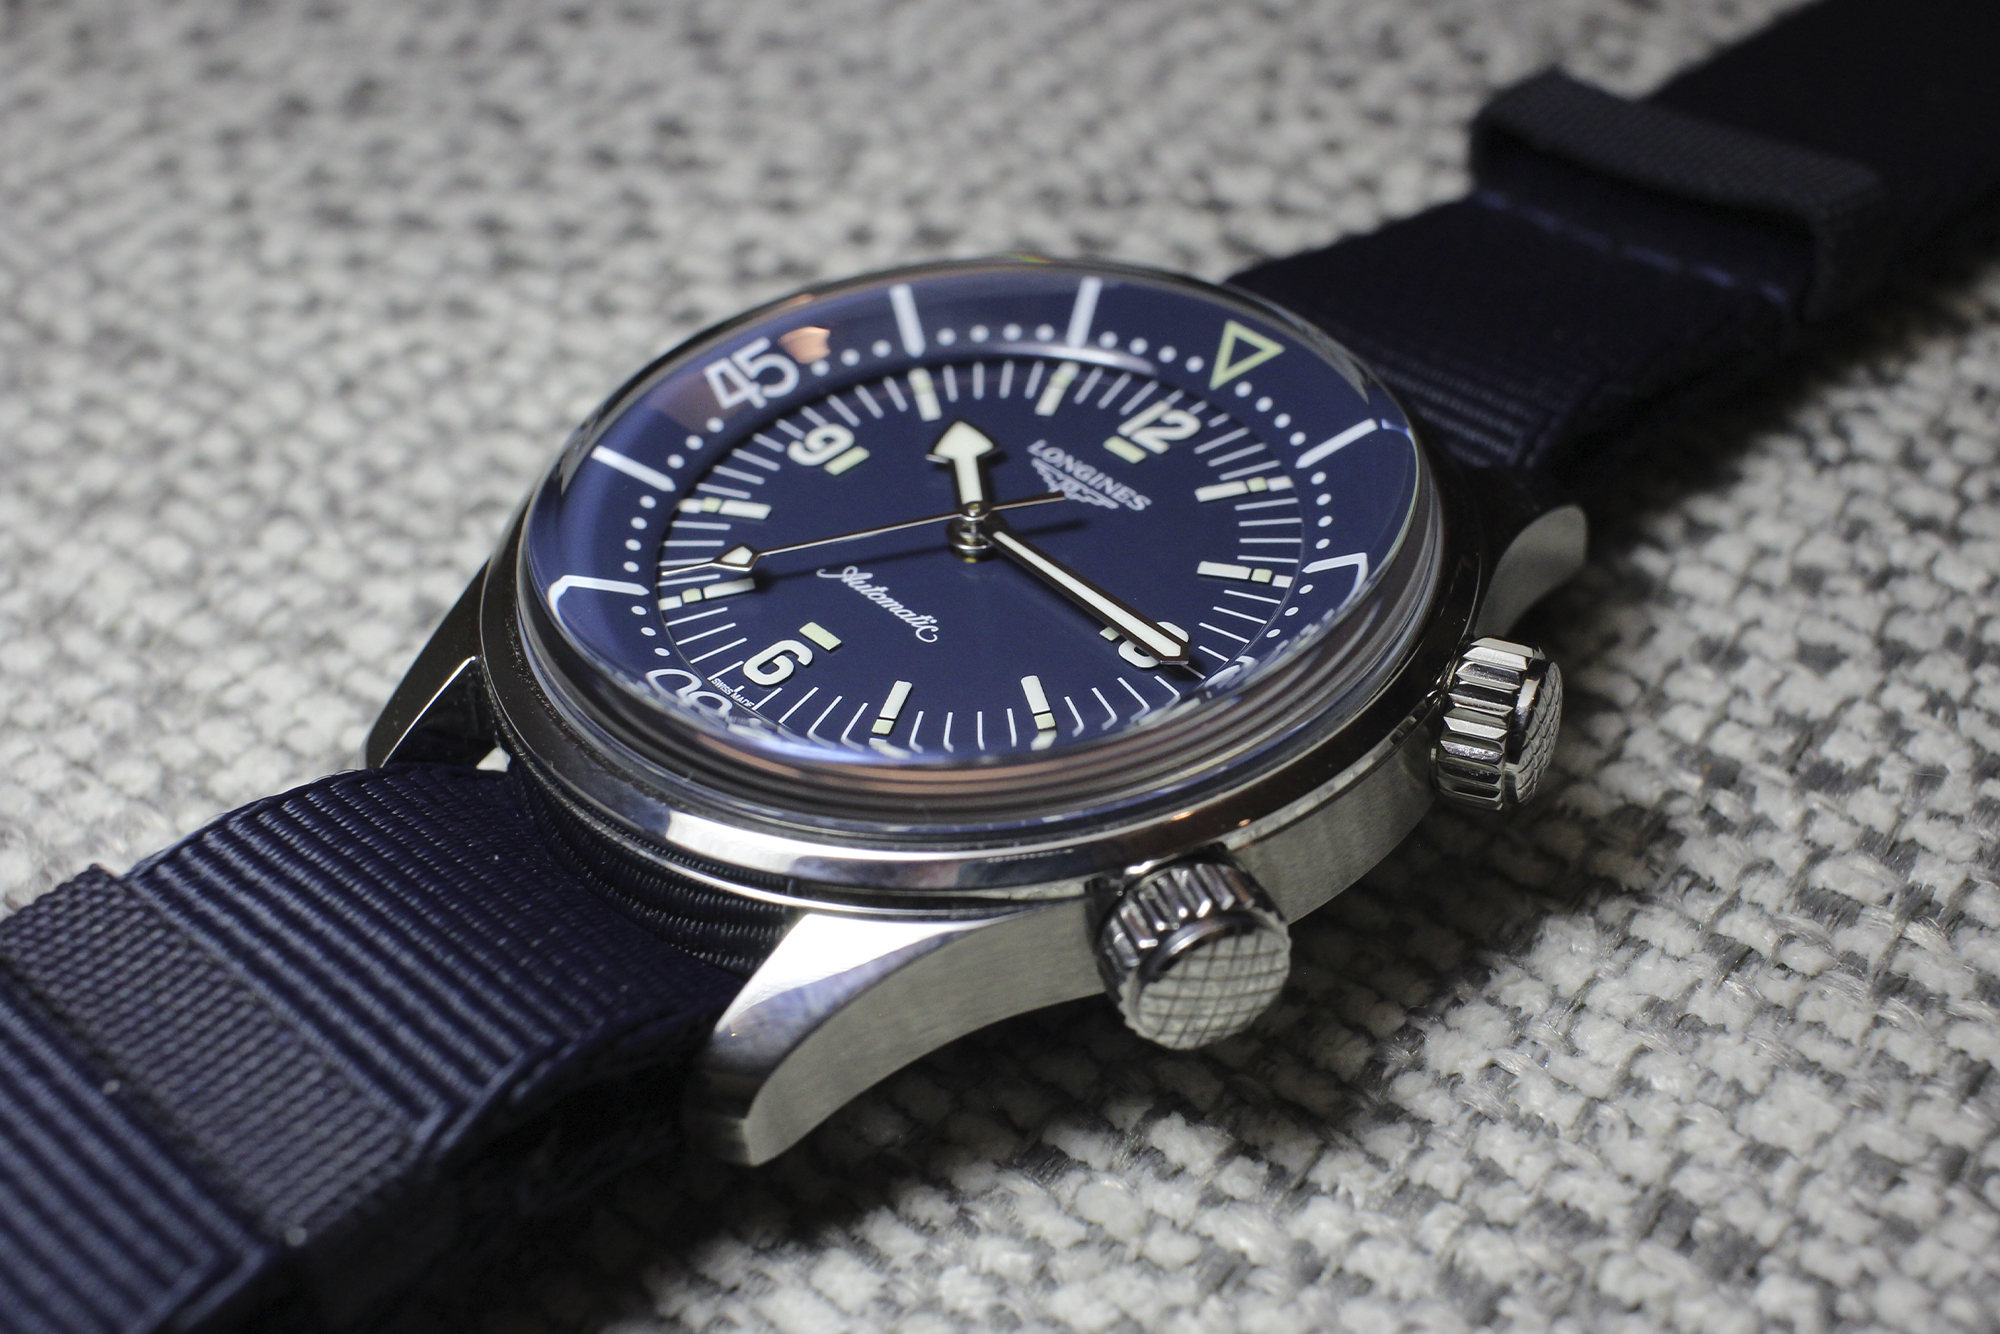 Longines Legend Diver dive watch from side showing blue strap and crown